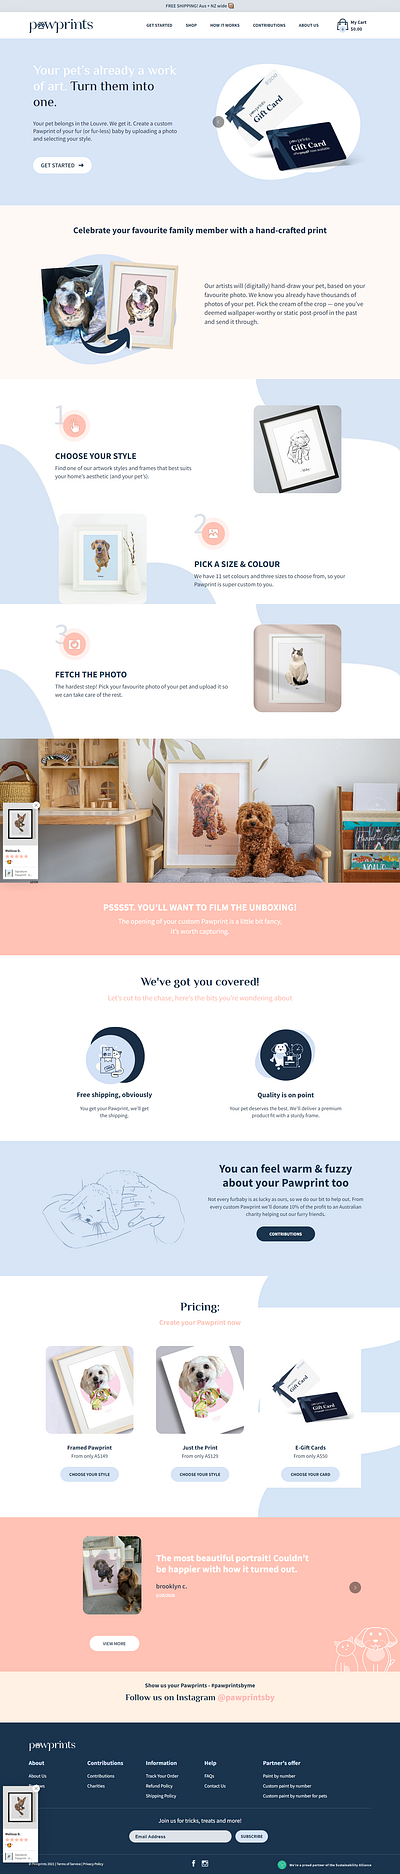 Shopify Dog Pagefly landing live site animation branding dropshipping store graphic design motion graphics one product store product listing product resell shopify dropshipping shopify store shopify store design shopify store redesign store design